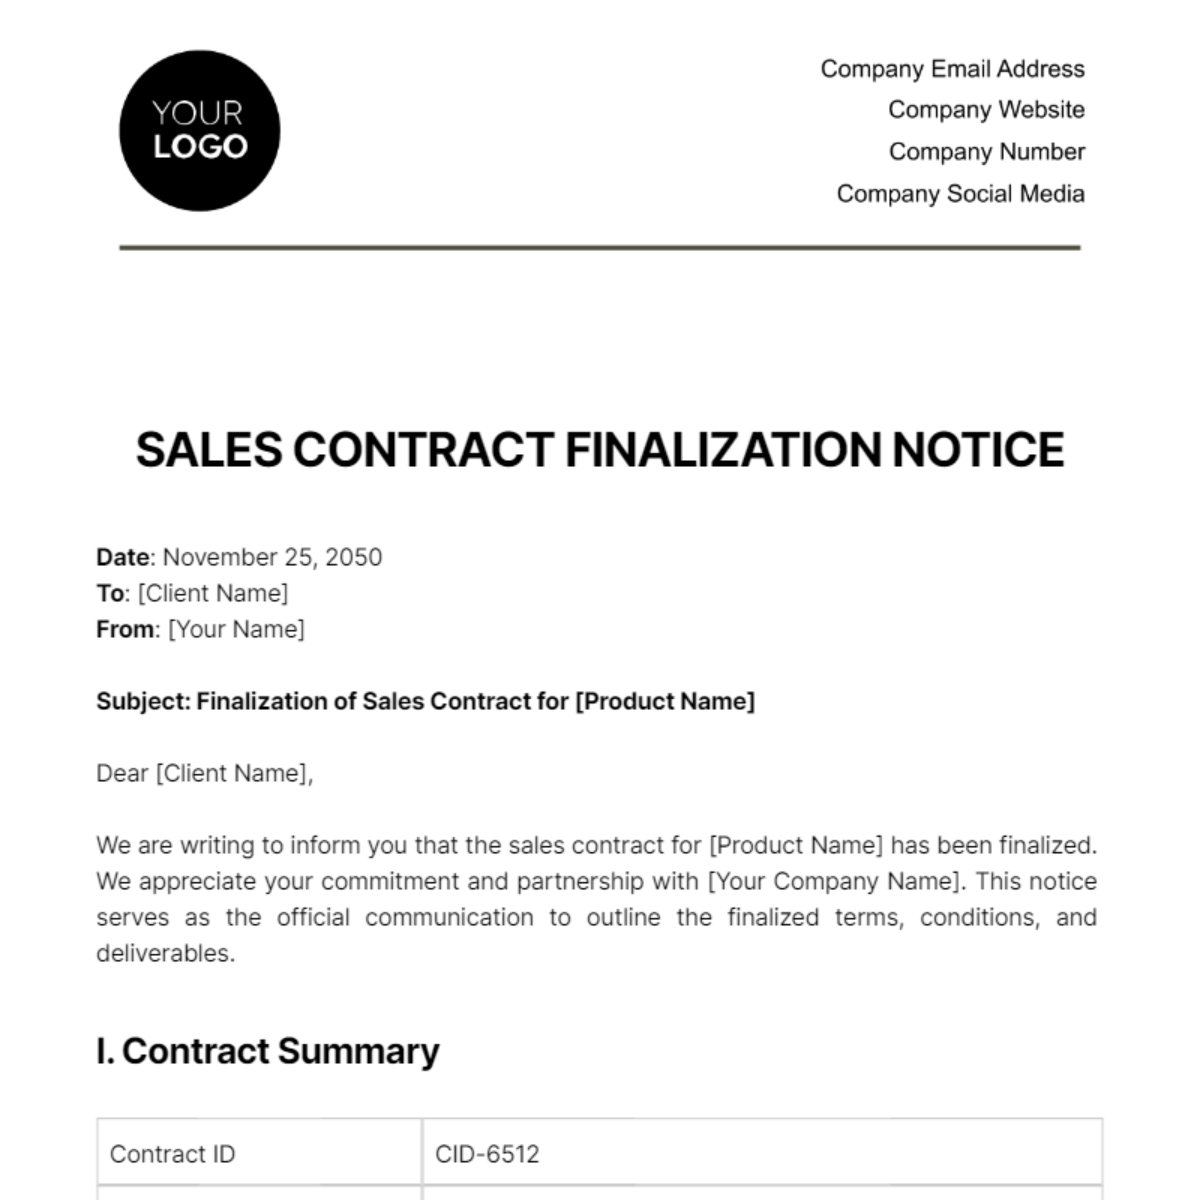 Free Sales Contract Finalization Notice Template